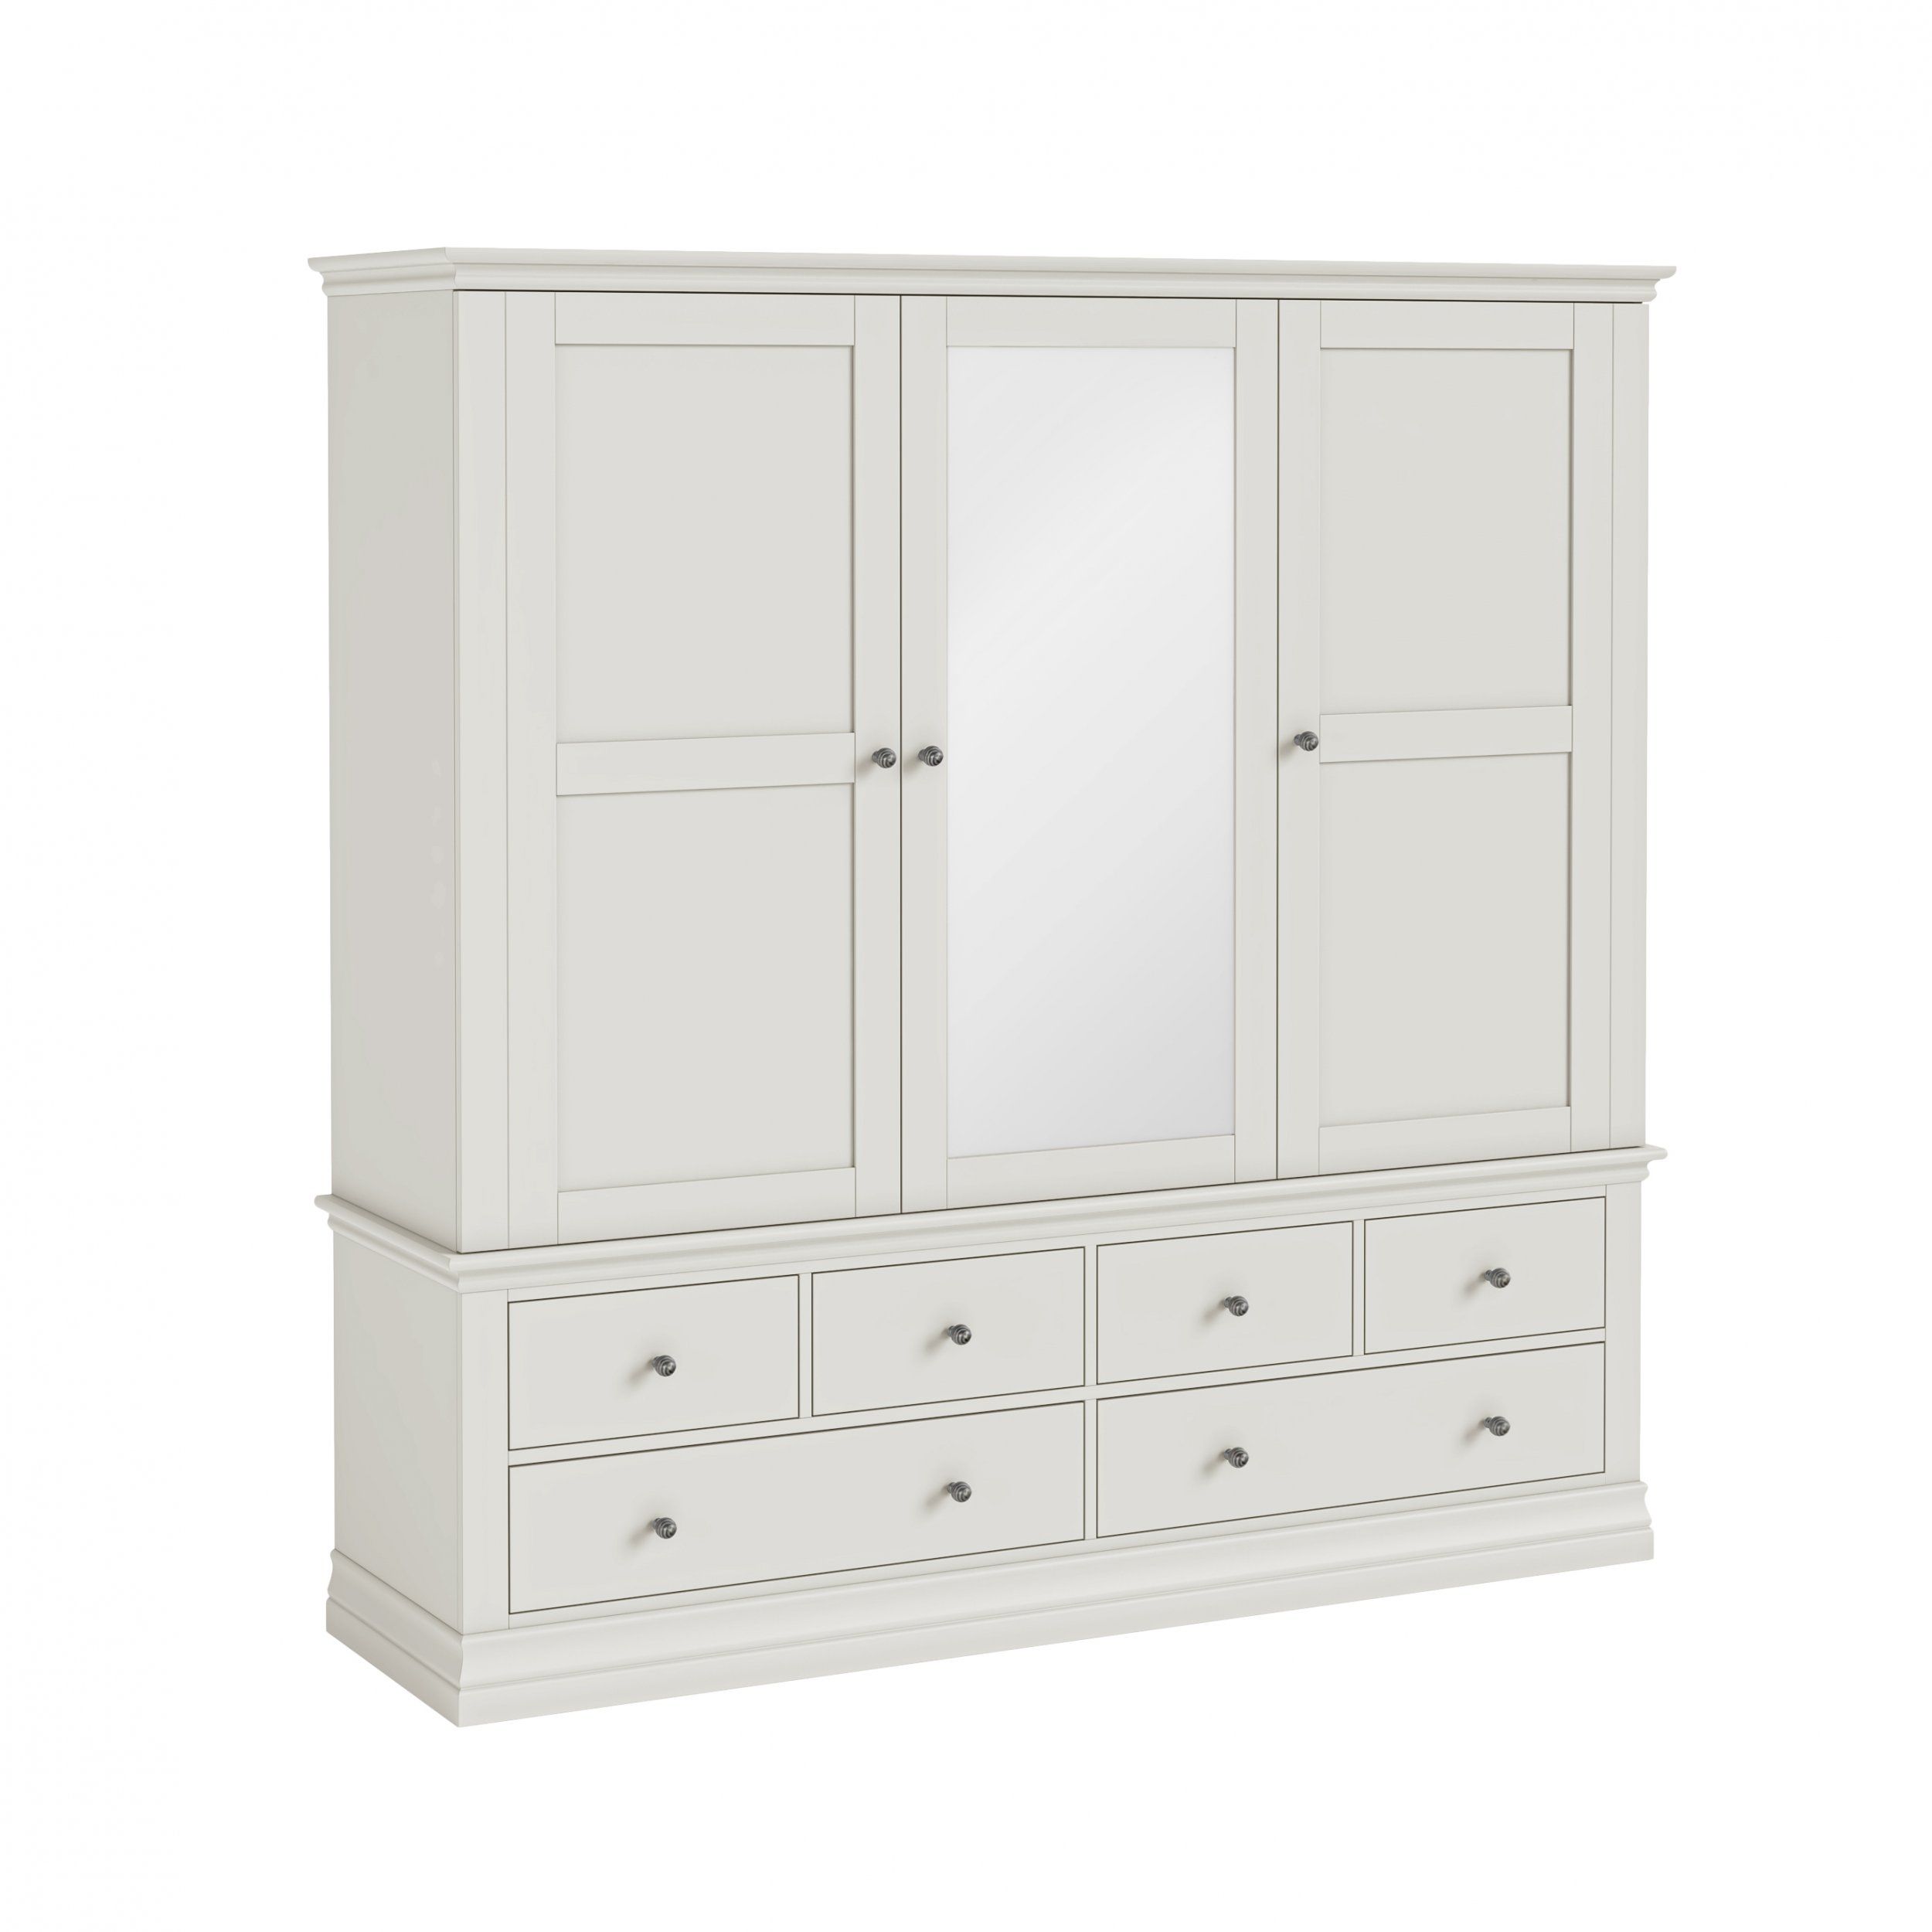 Bordeaux Triple Wardrobe With 6 Drawers & Mirror Door – Cotton | Eyres  Furniture Pertaining To Bordeaux Wardrobes (View 6 of 15)